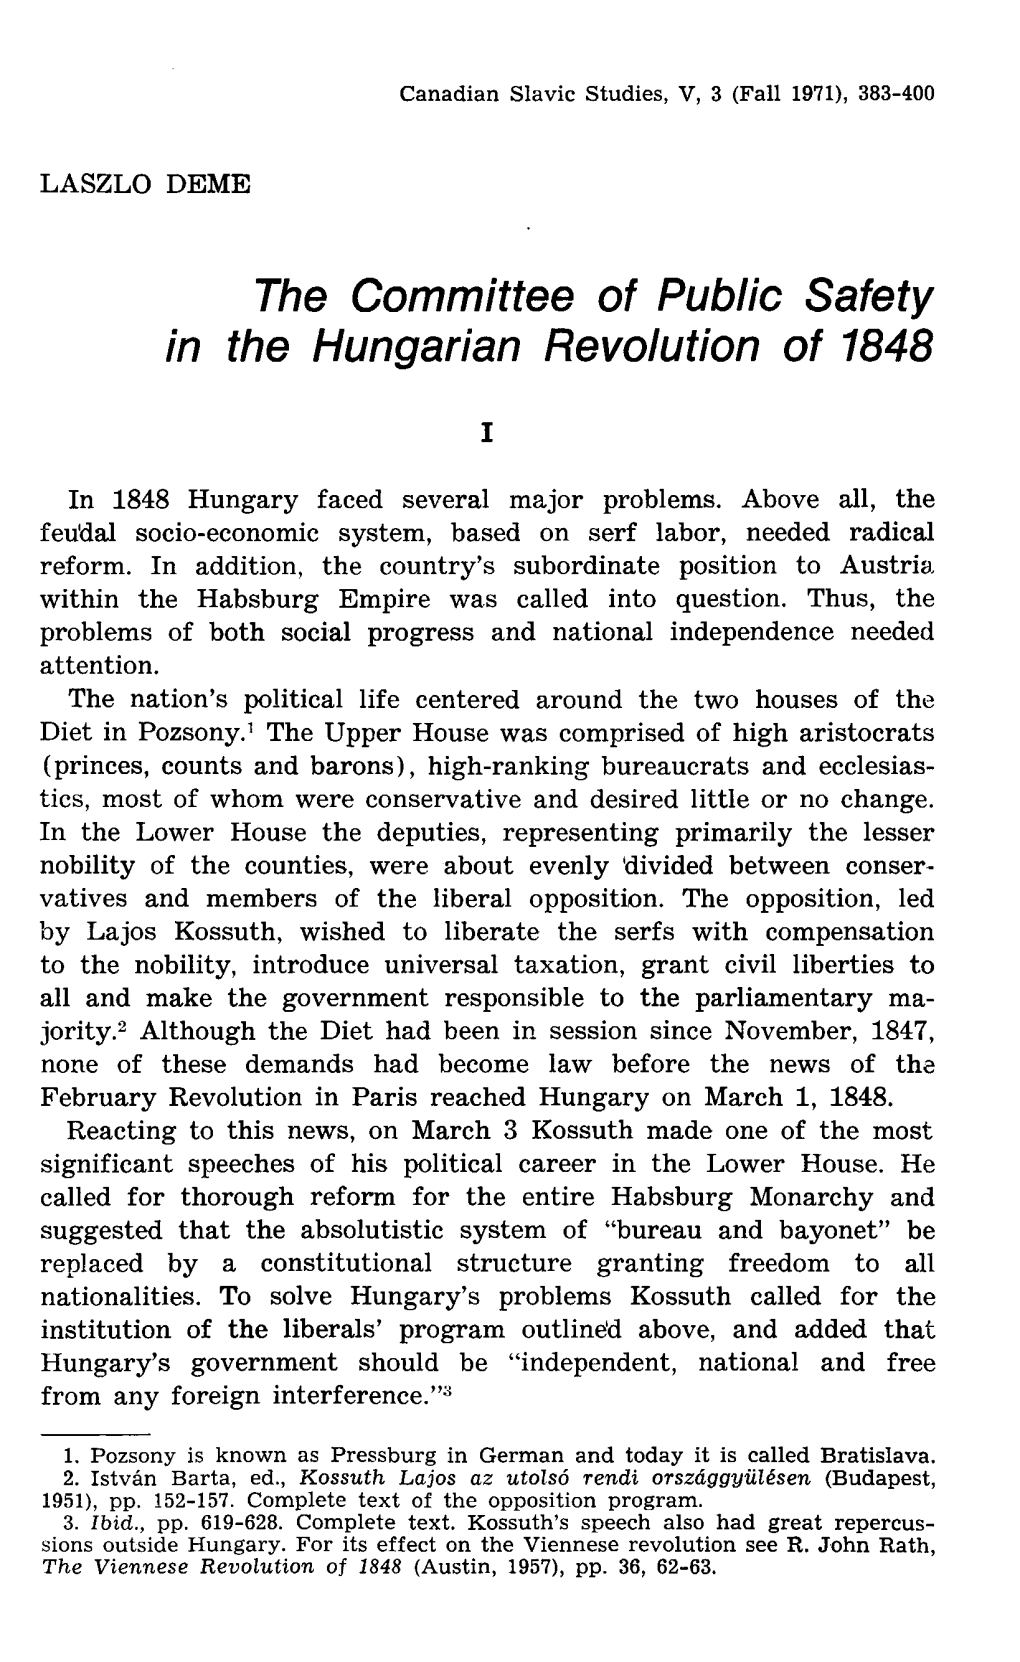 The Committee of Public Safety in the Hungarian Revolution of 1848